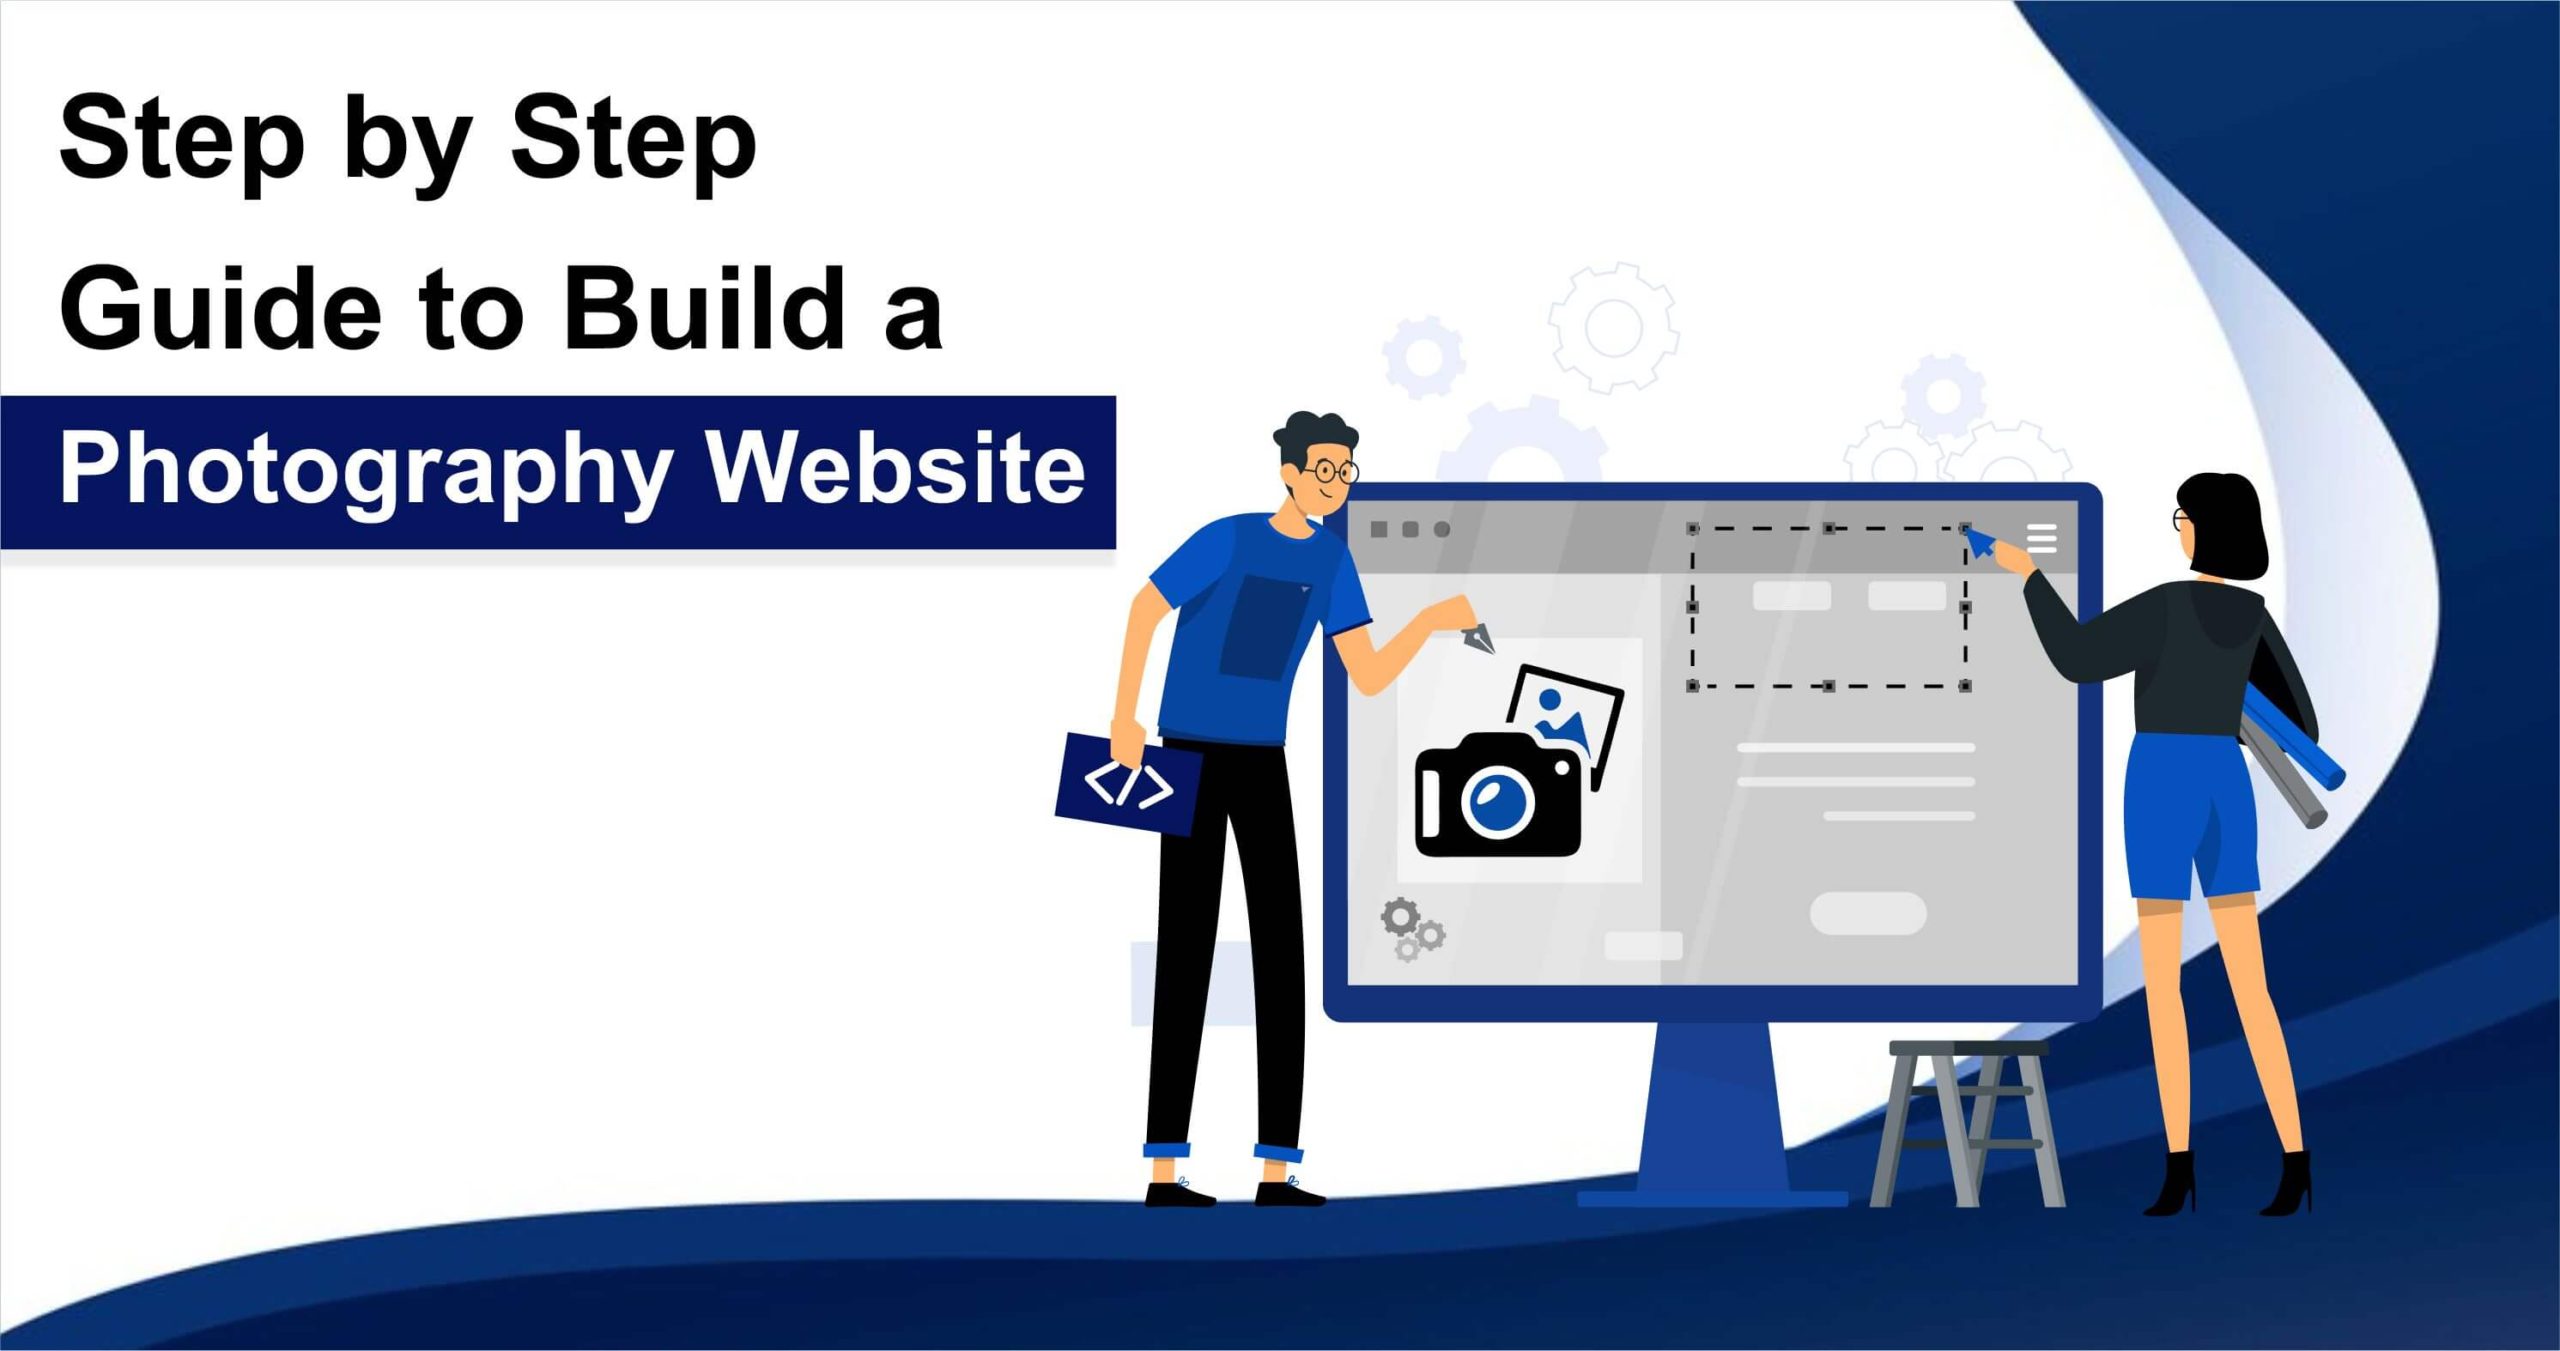 Step by Step Guide to Build a Photography Website